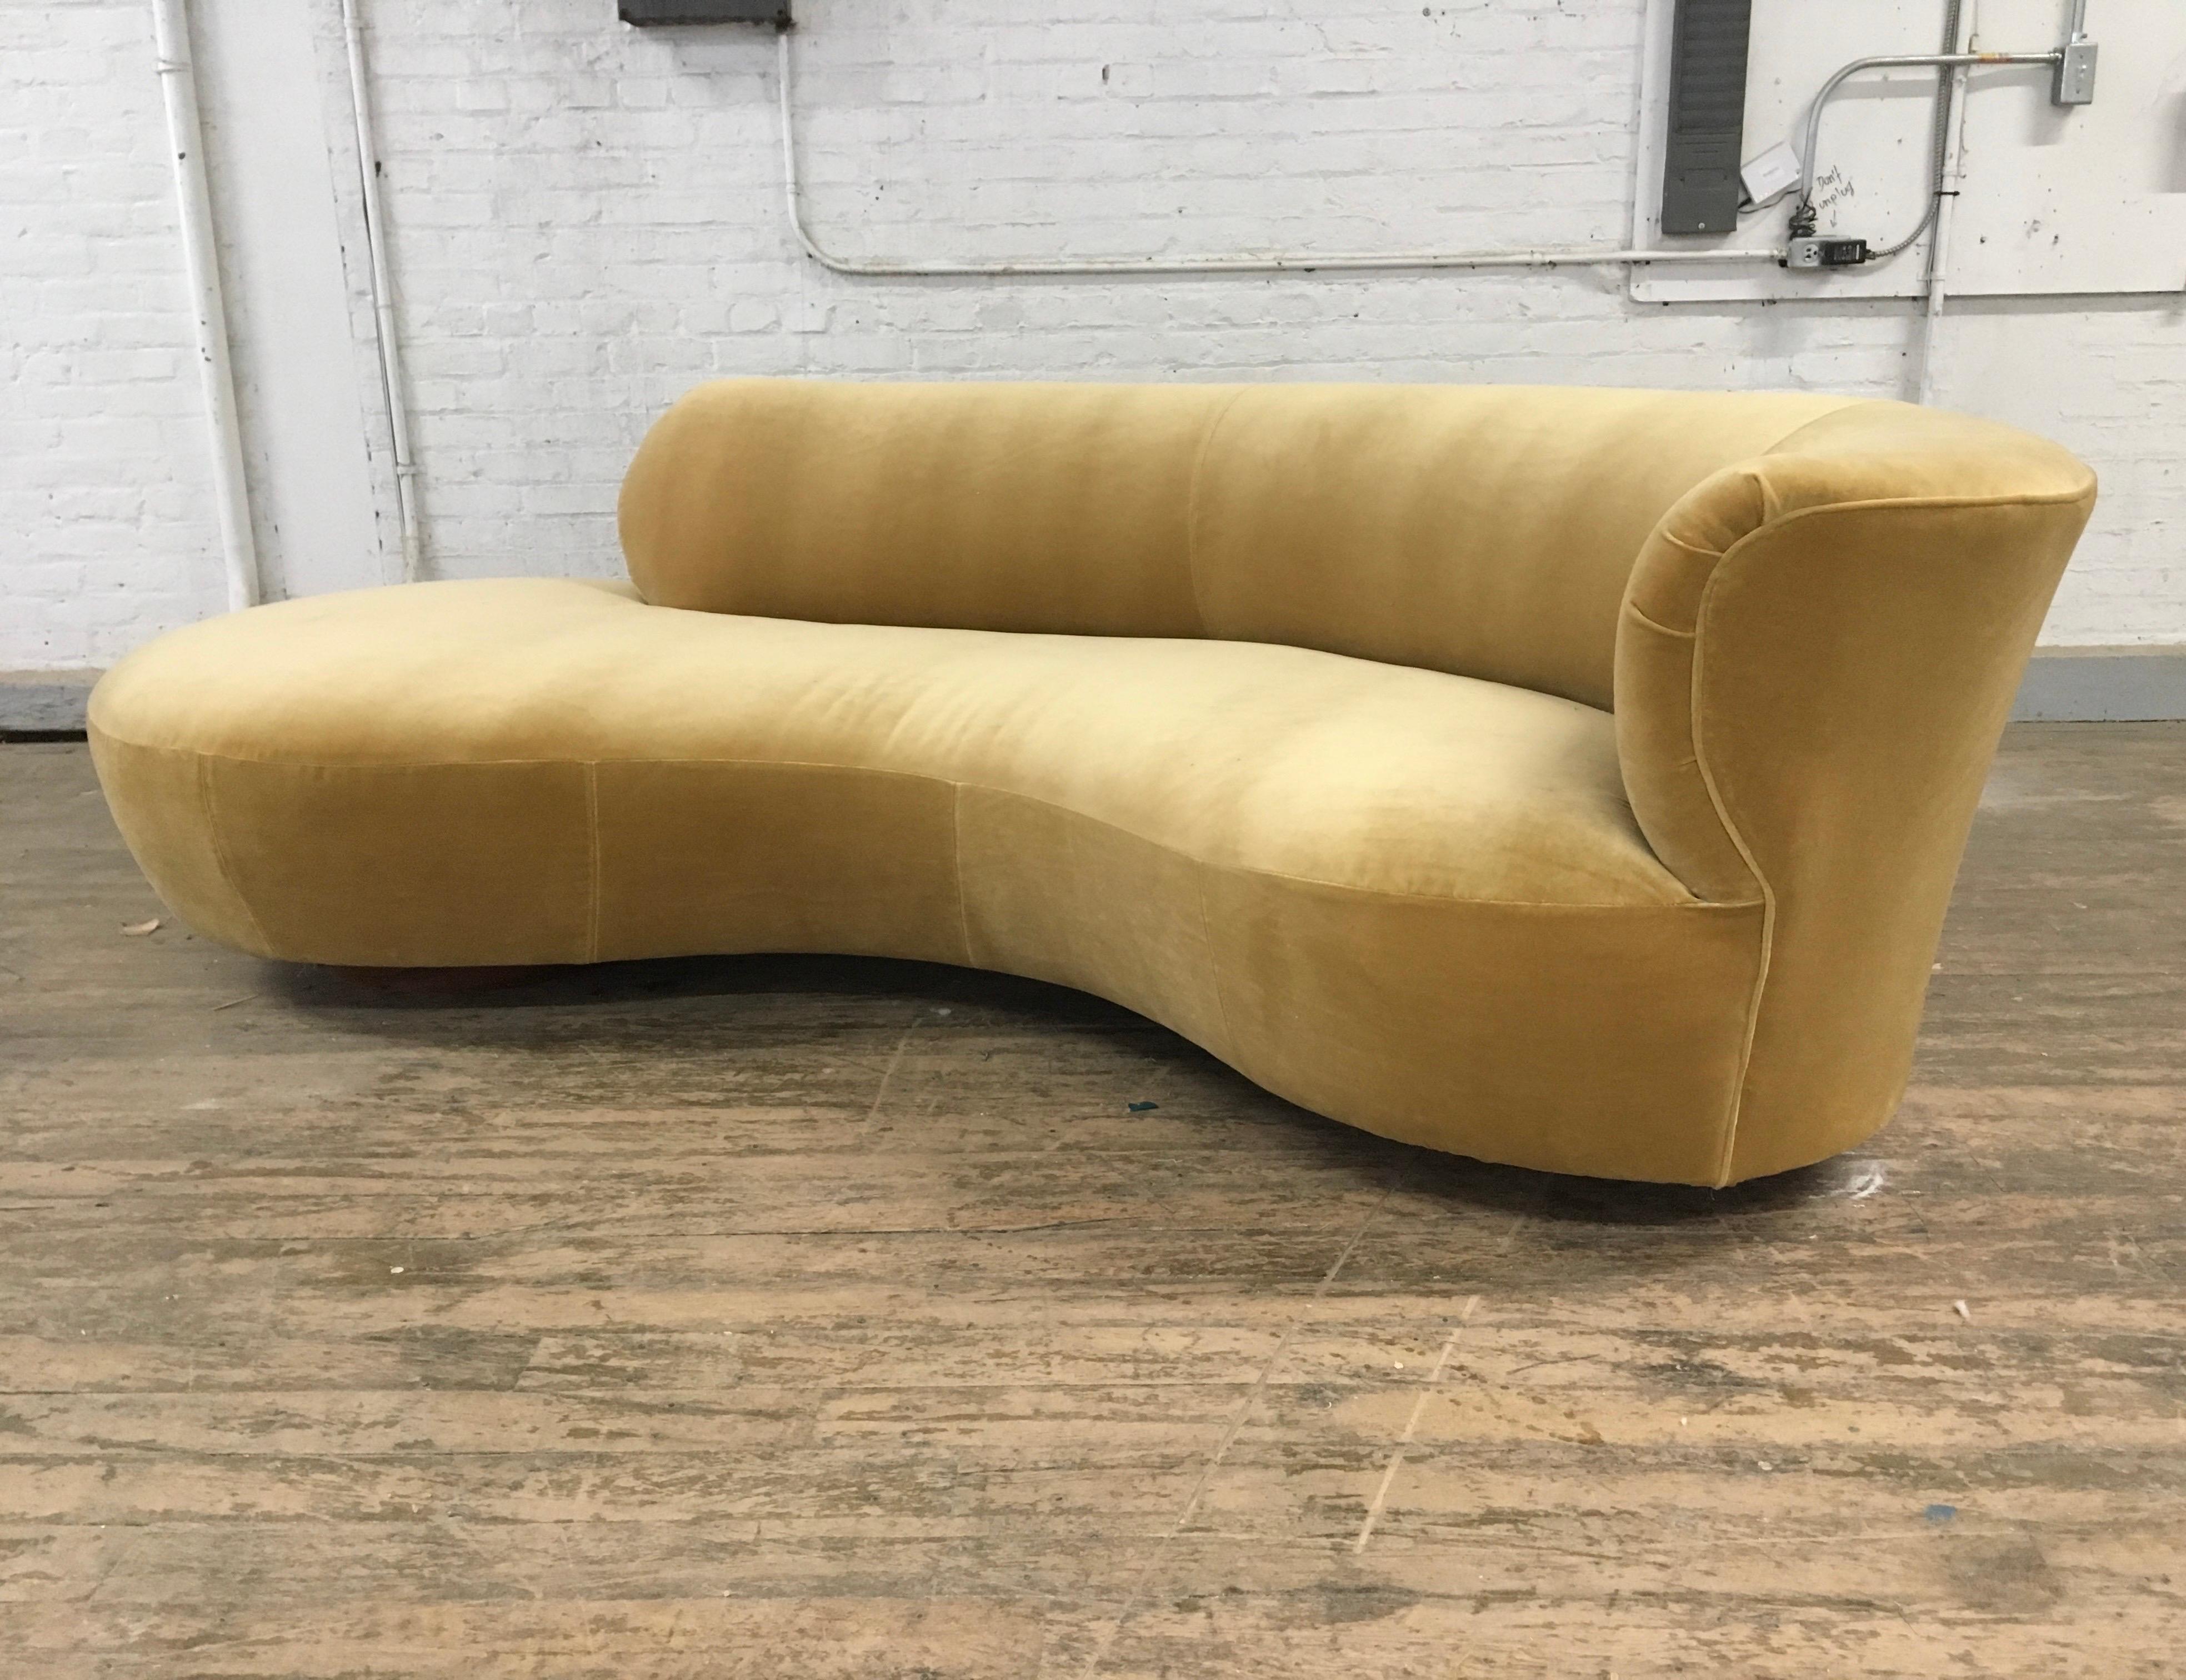 Serpentine sofa attributed to the late Vladimir Kagan. Upholstery is replaced in a Camel velvet.